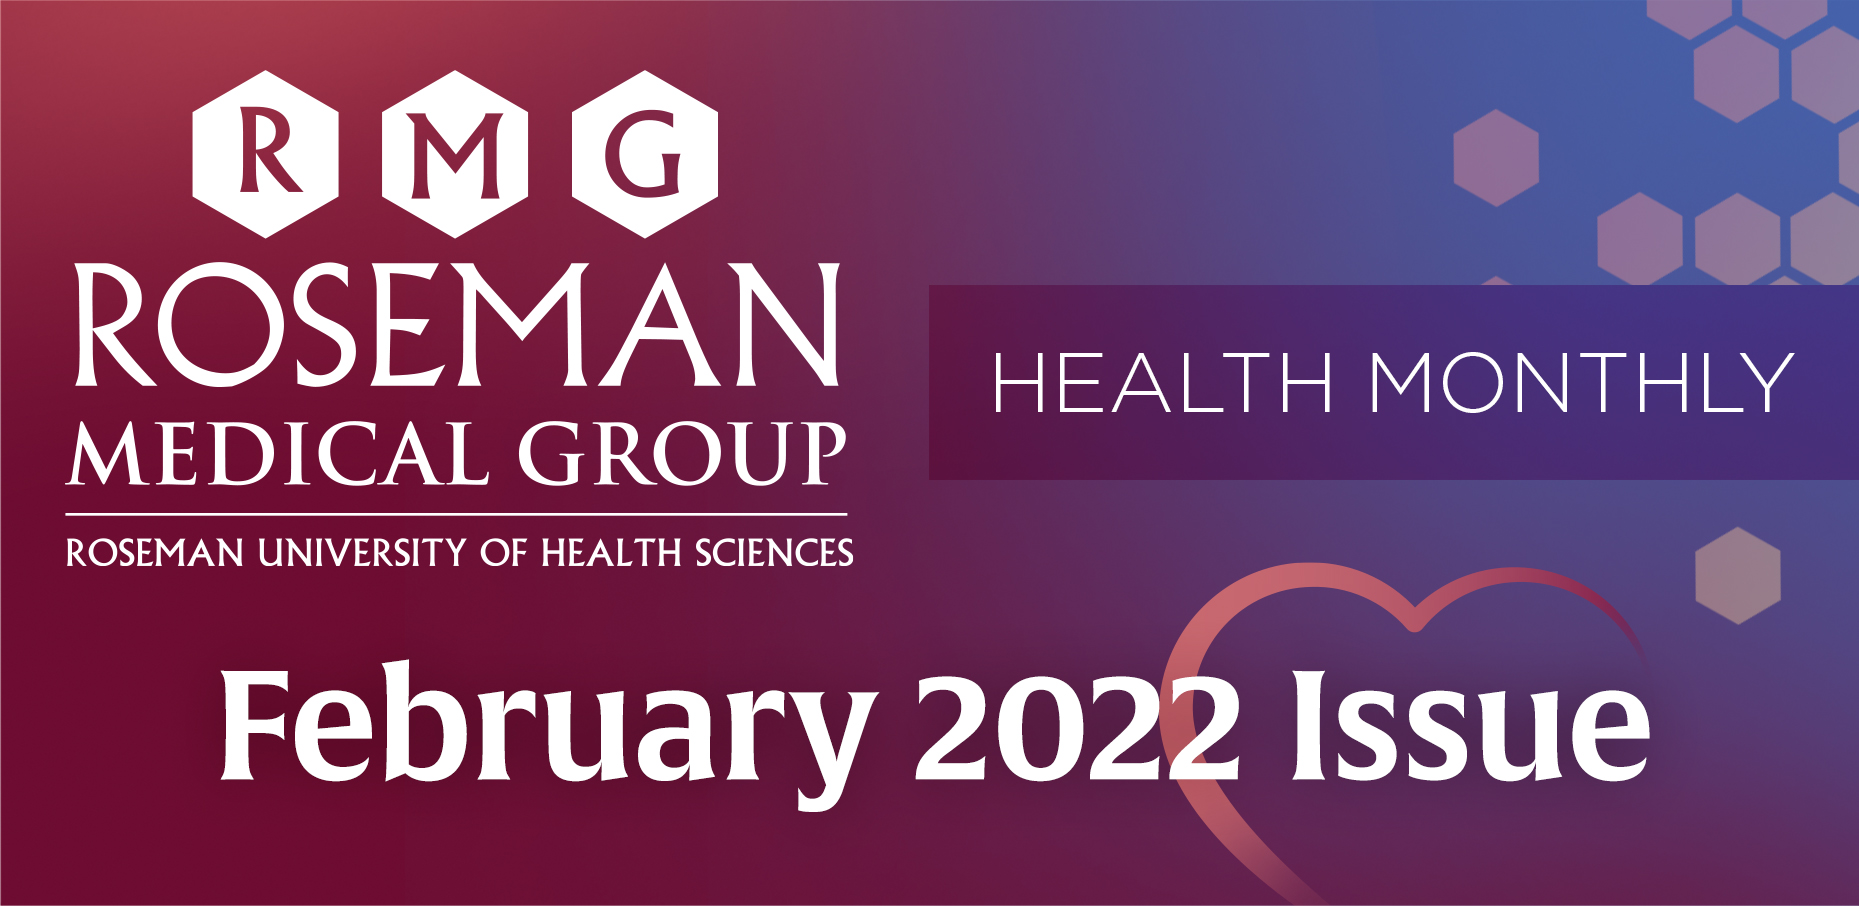 RMG Health Monthly: February 2022 Issue